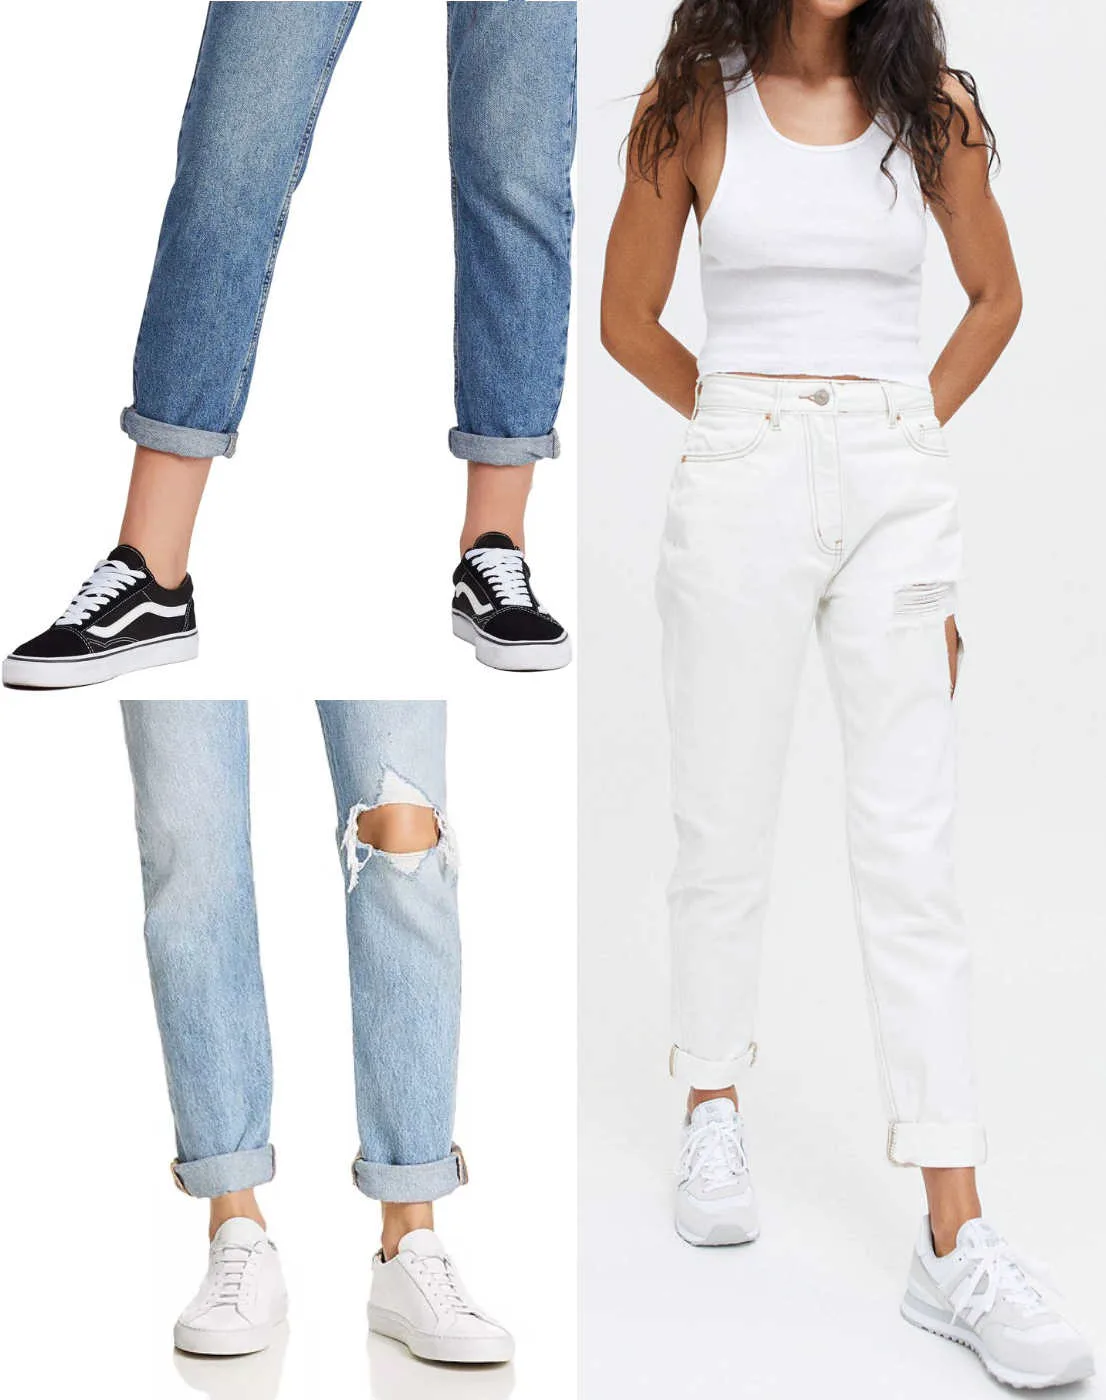 3 women wearing mom jeans with sneakers.